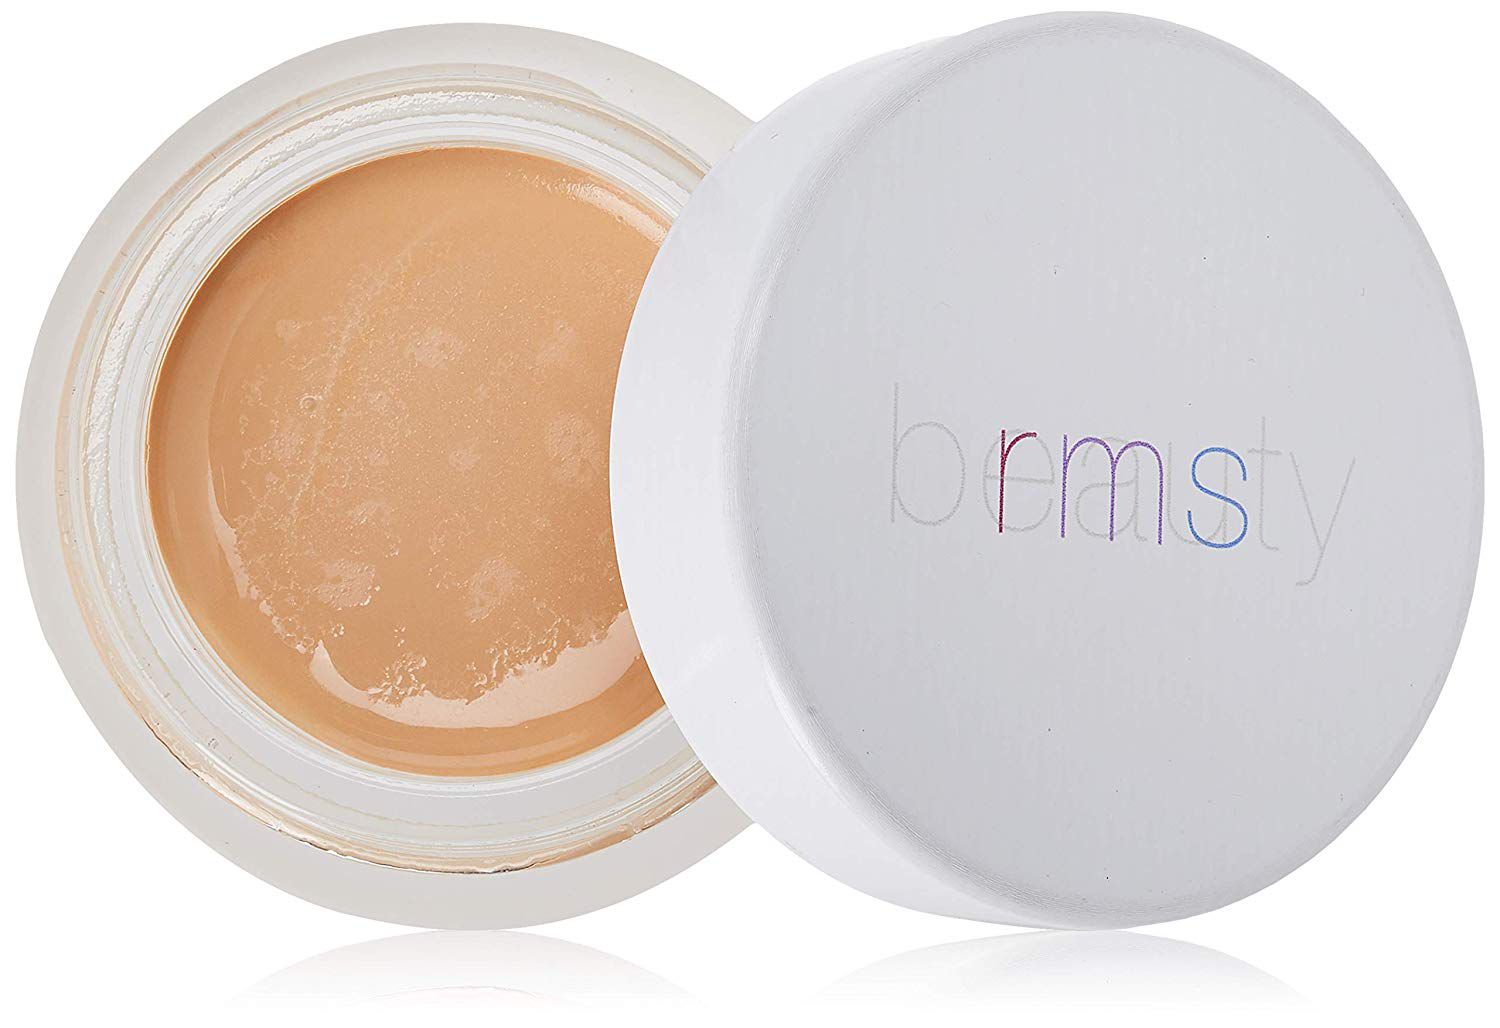 rms beauty concealer